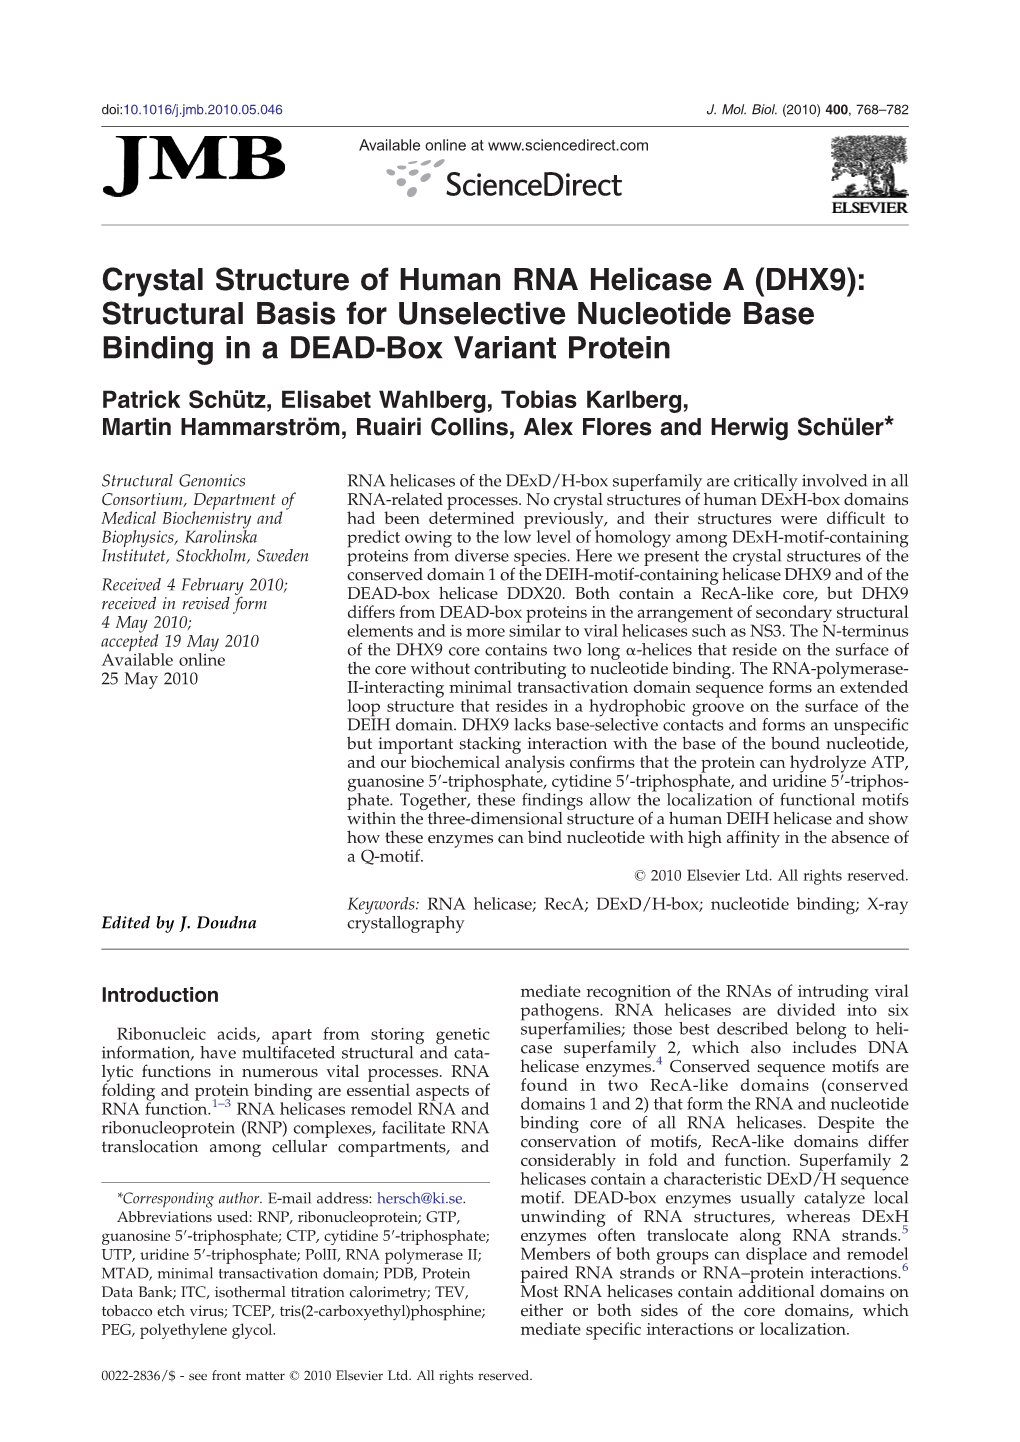 Crystal Structure of Human RNA Helicase a (DHX9): Structural Basis for Unselective Nucleotide Base Binding in a DEAD-Box Variant Protein